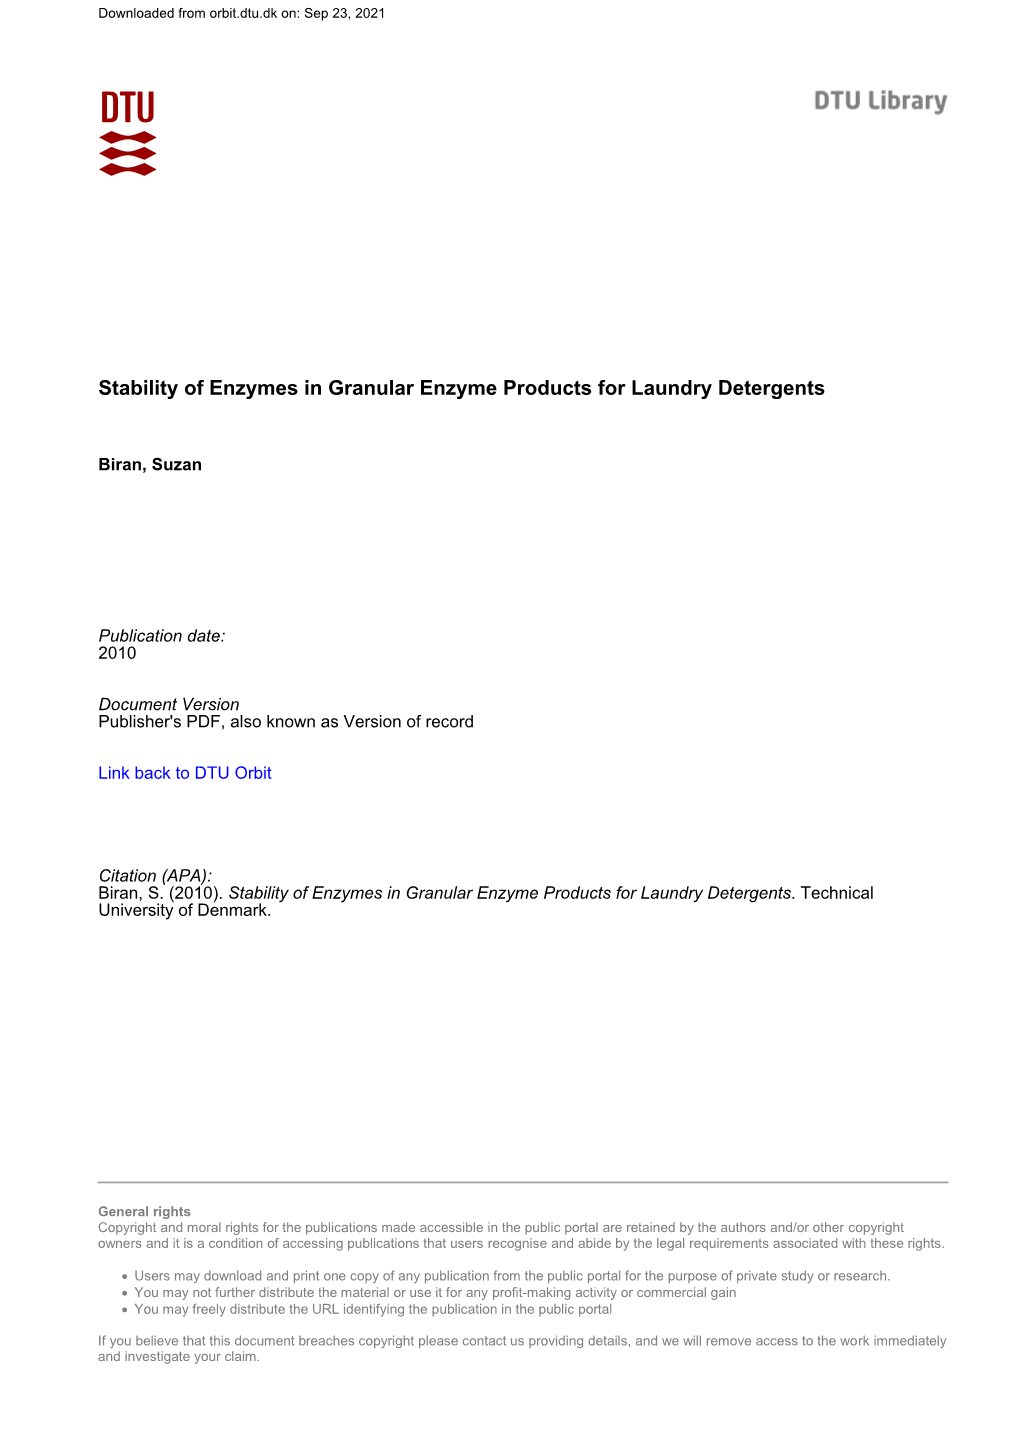 Stability of Enzymes in Granular Enzyme Products for Laundry Detergents